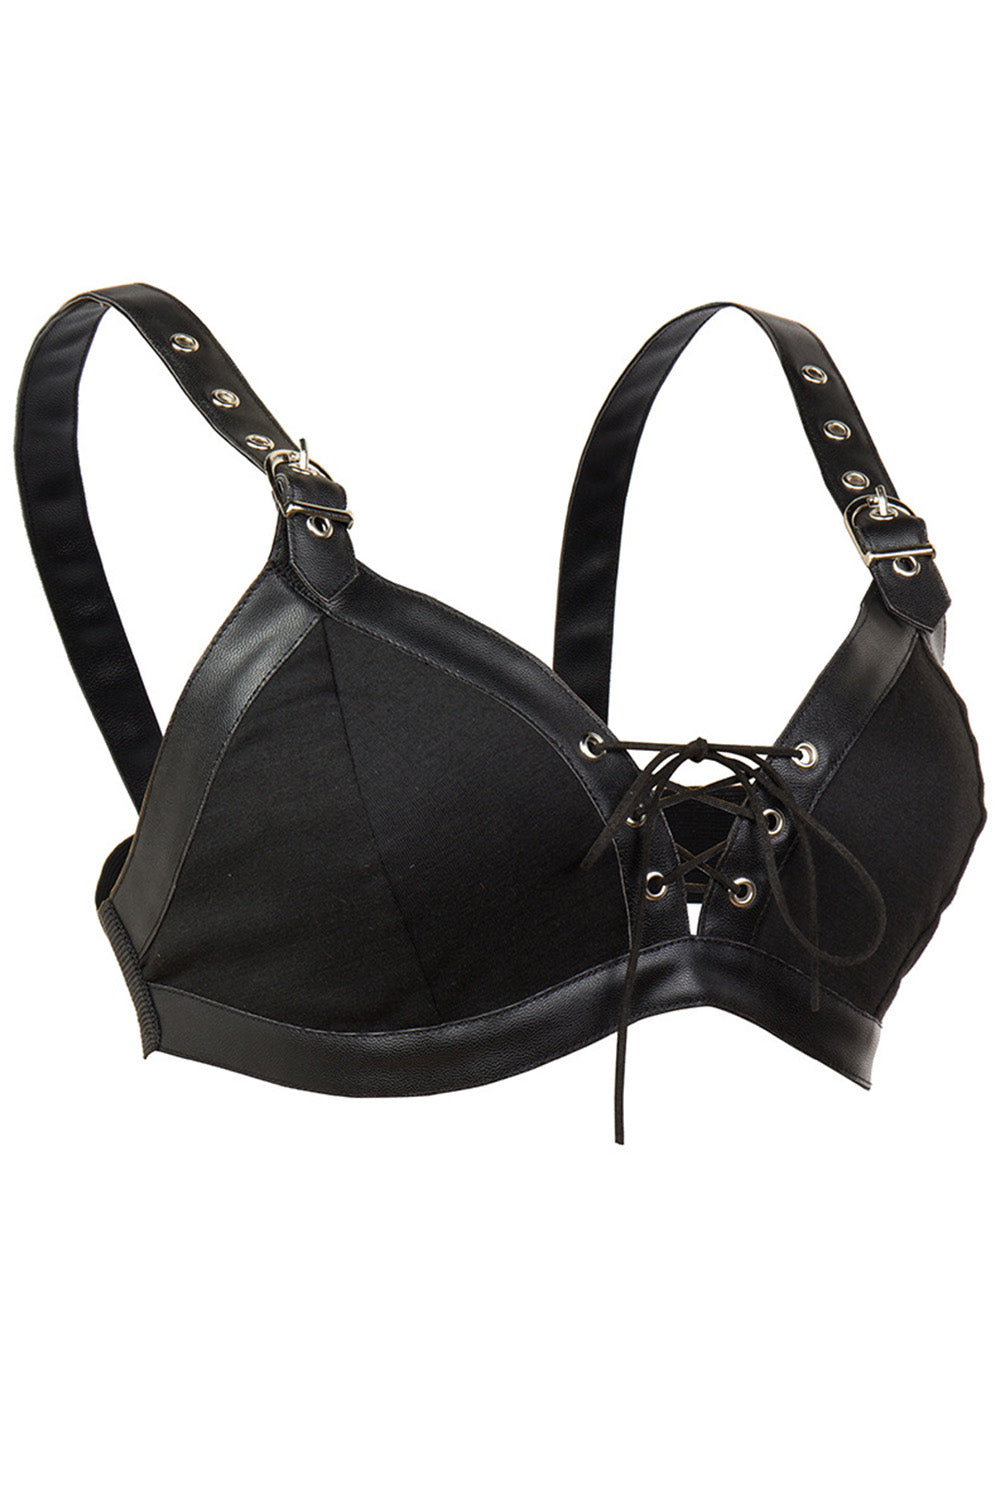 Gothic Black Grommet Buckle Strap Lace Up Without Steel Ring Bras